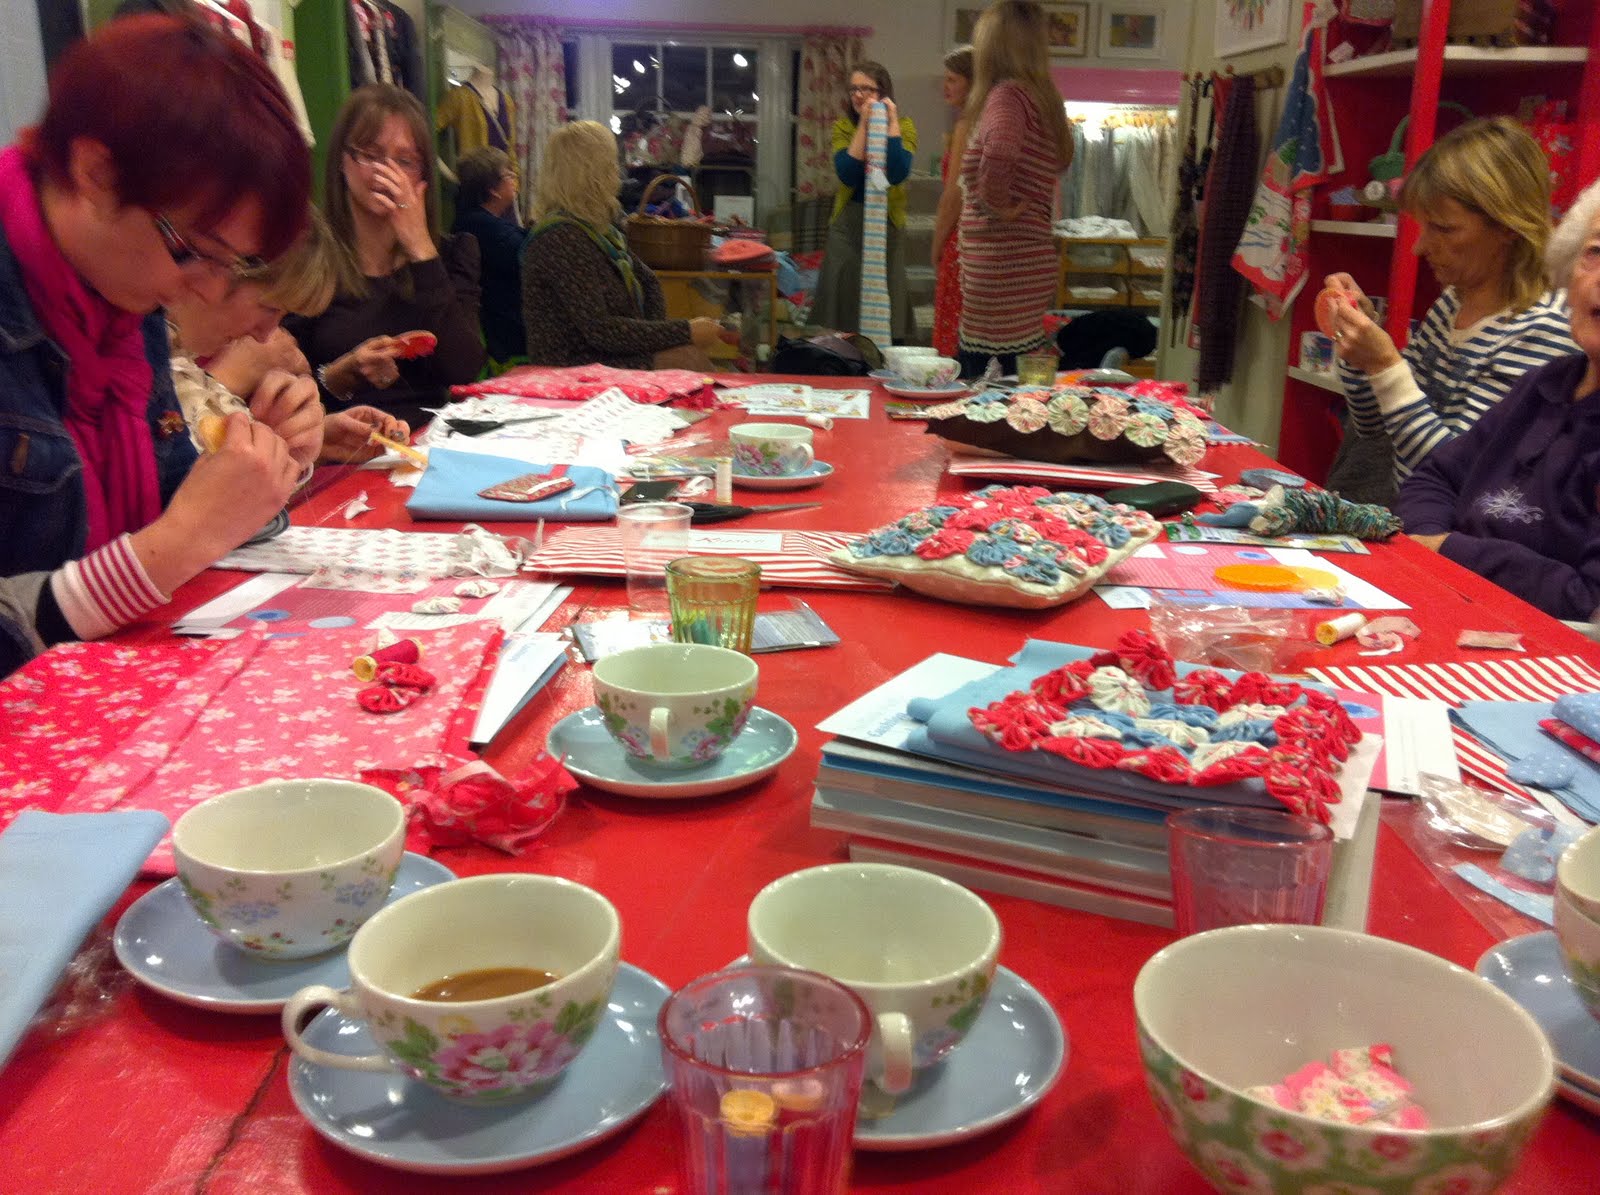 Patchwork and lace: Cath kidston craft event evening